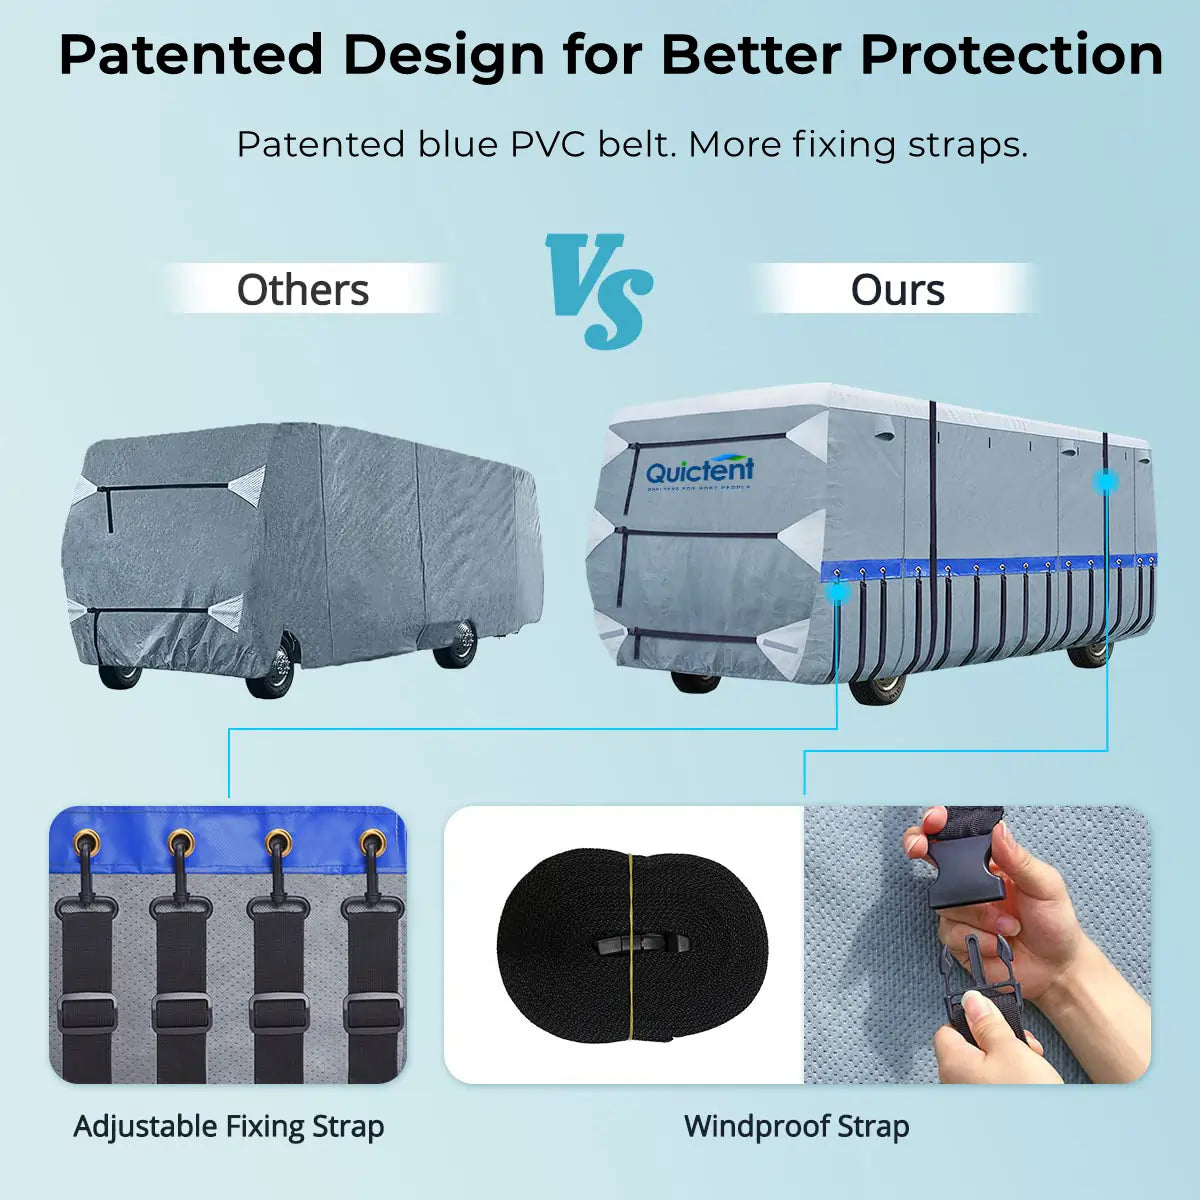 Patented Design for Better Protection